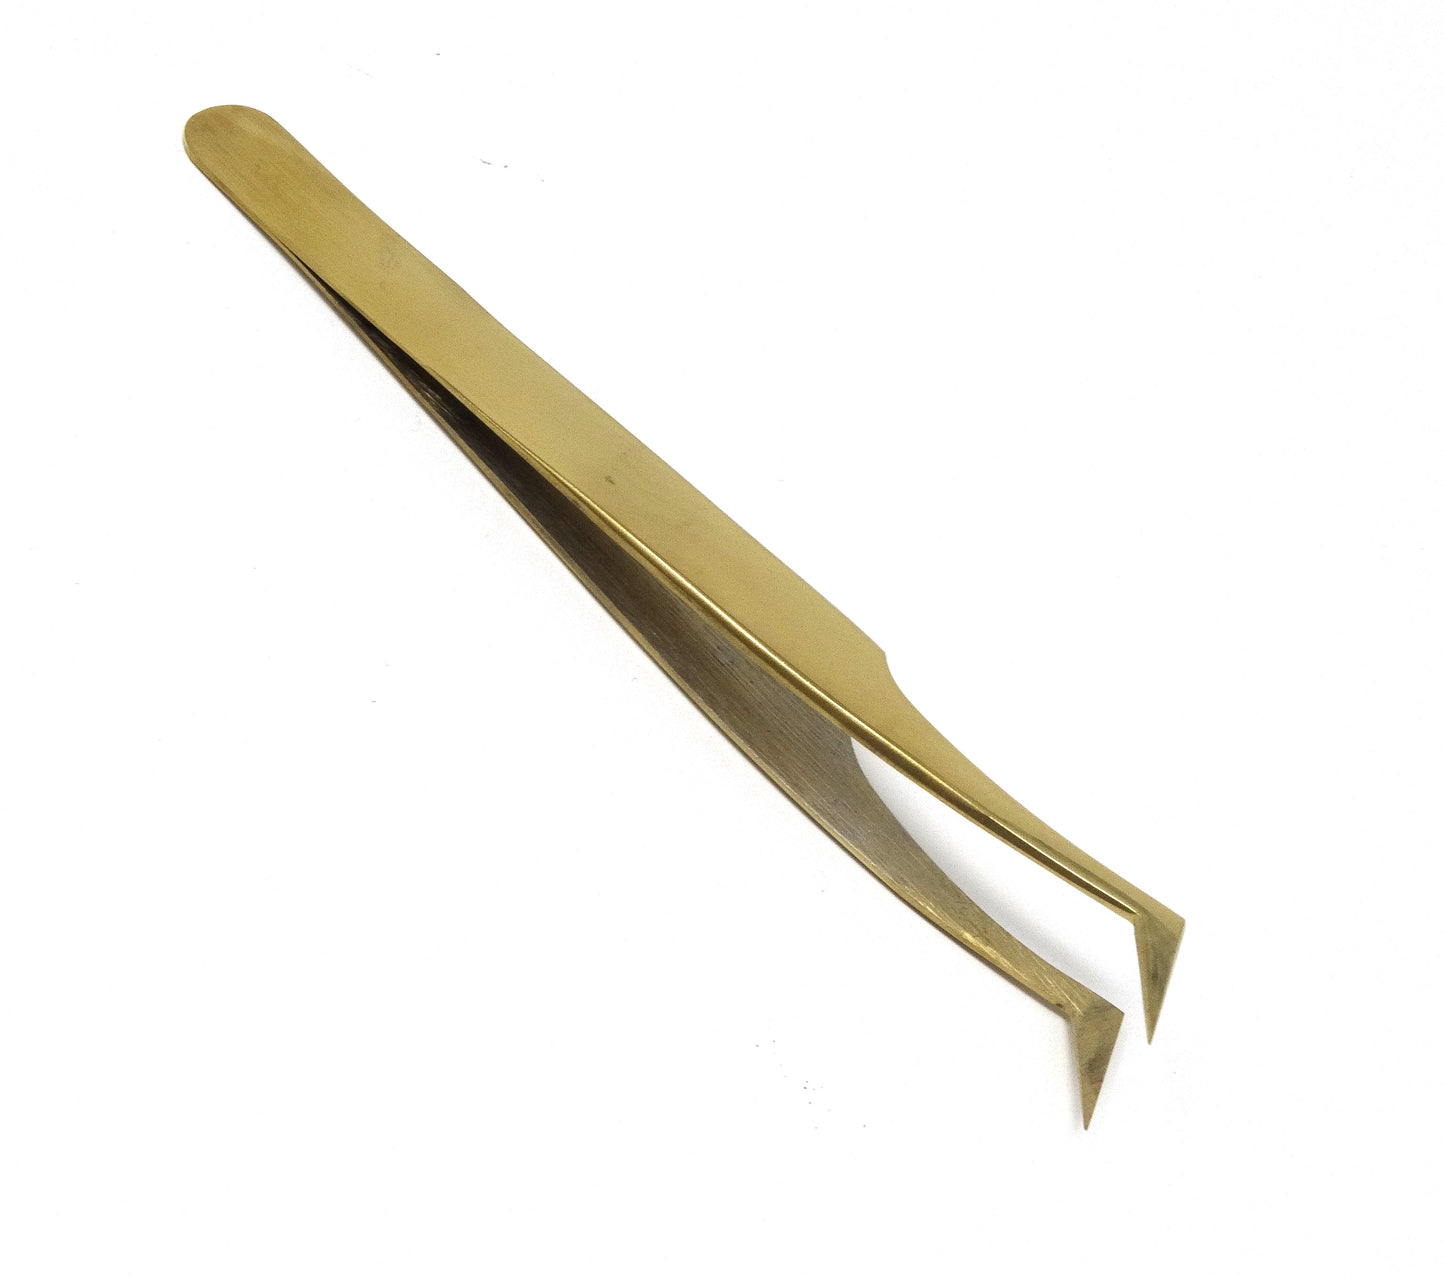 Stainless Steel Micro Surgical Forceps Tweezers Semi Angled, Gold Plated, Premium Quality